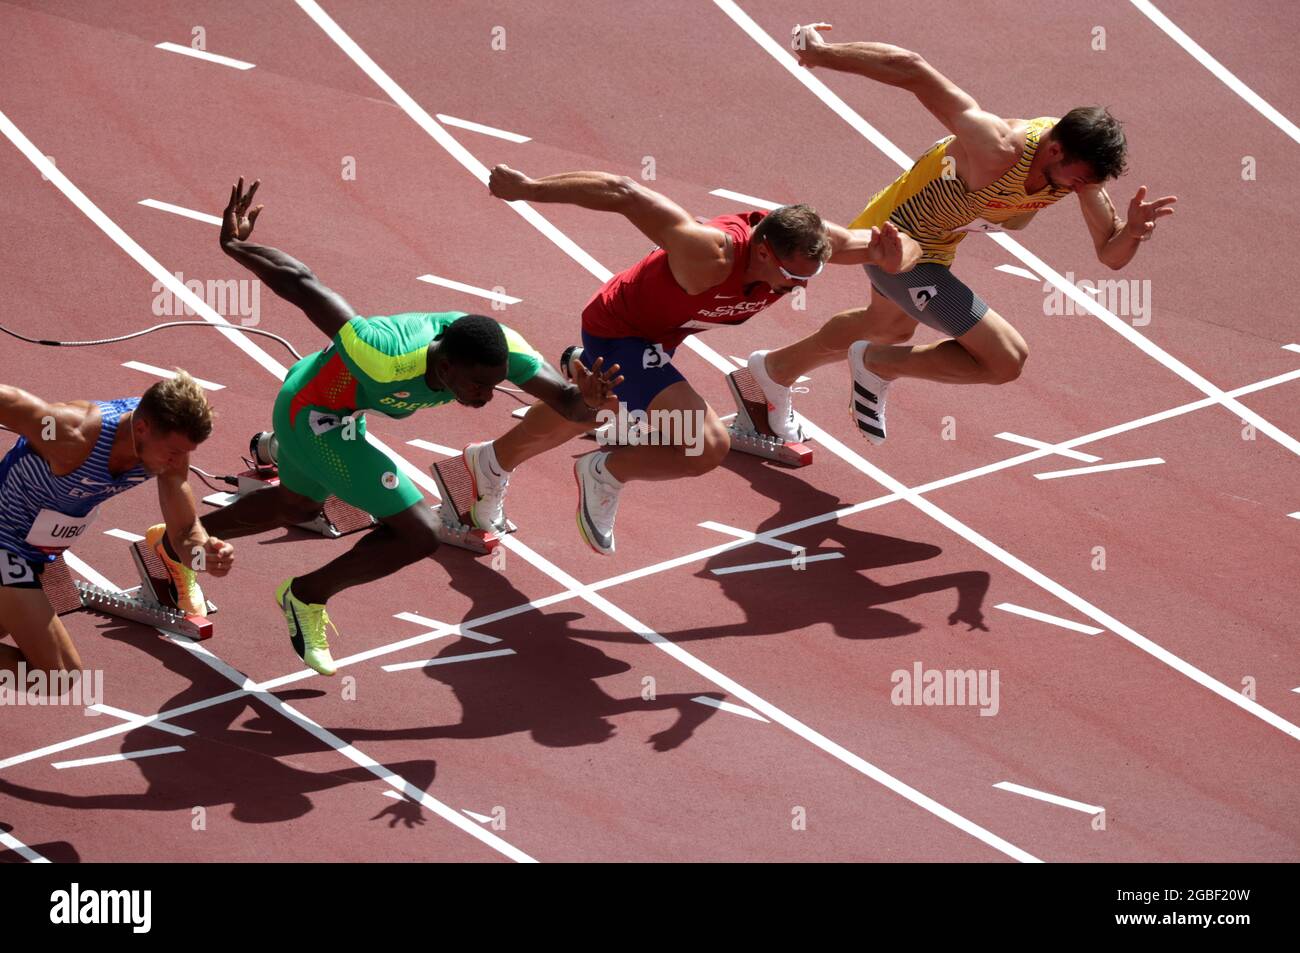 Tokyo 2020 Olympics - Athletics - Men's 100m - Decathlon 100m - Olympic Stadium, Tokyo, Japan - August 4, 2021. Niklas Kaul of Germany, Adam Helcelet of Czech Republic, Lindon Victor of Grenada and Maicel Uibo of Estonia in action at the start of Heat 1 REUTERS/Hannah Mckay Stock Photo